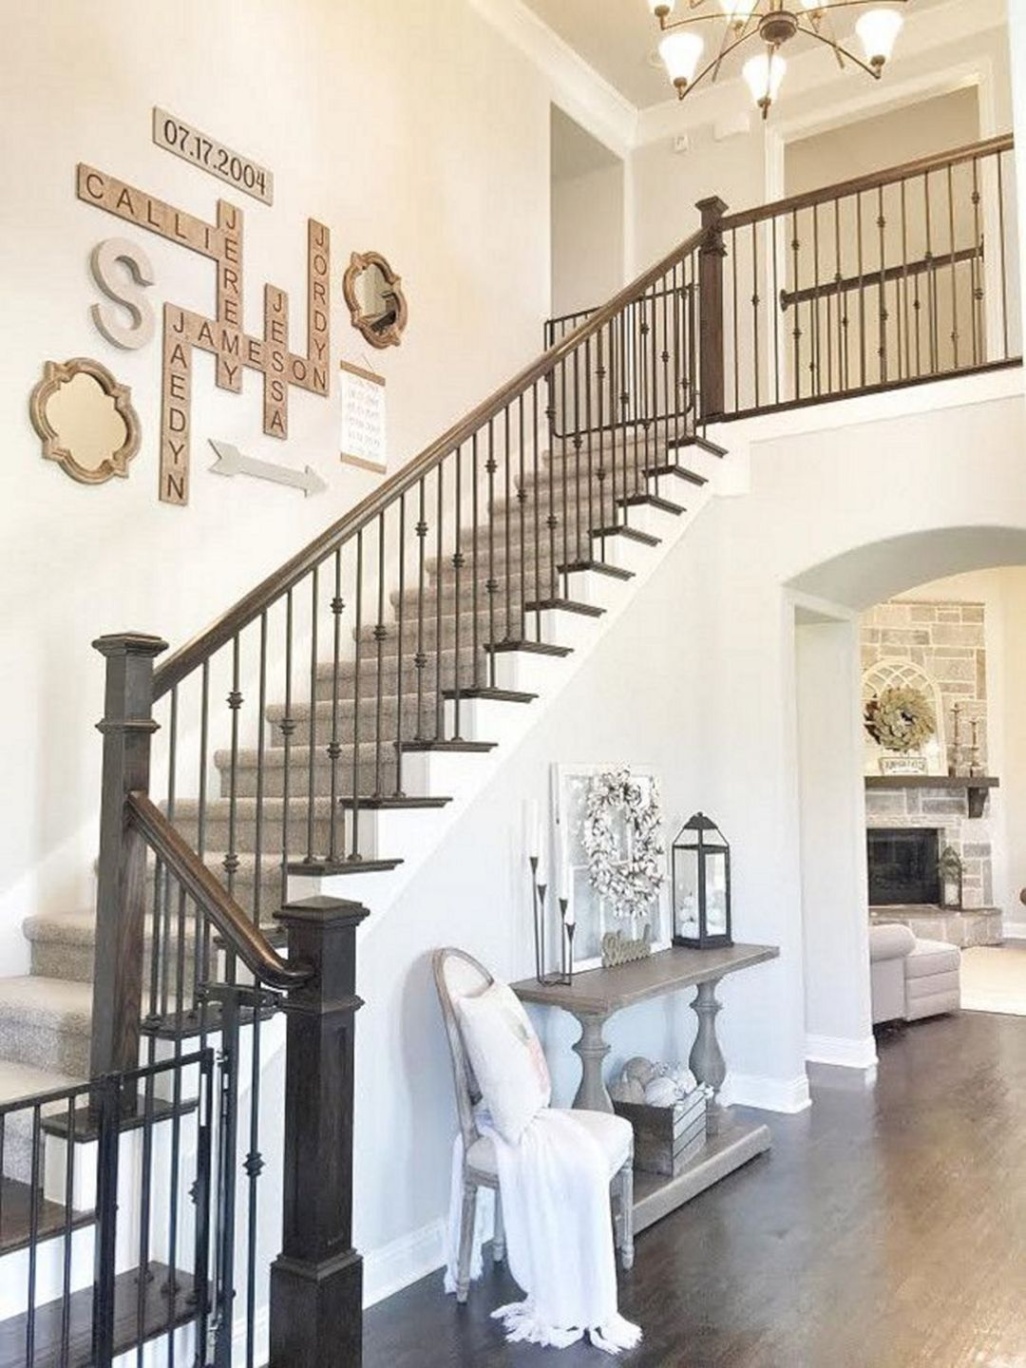 Upgrade Your Stairwell With Trendy Wall Decor Ideas!